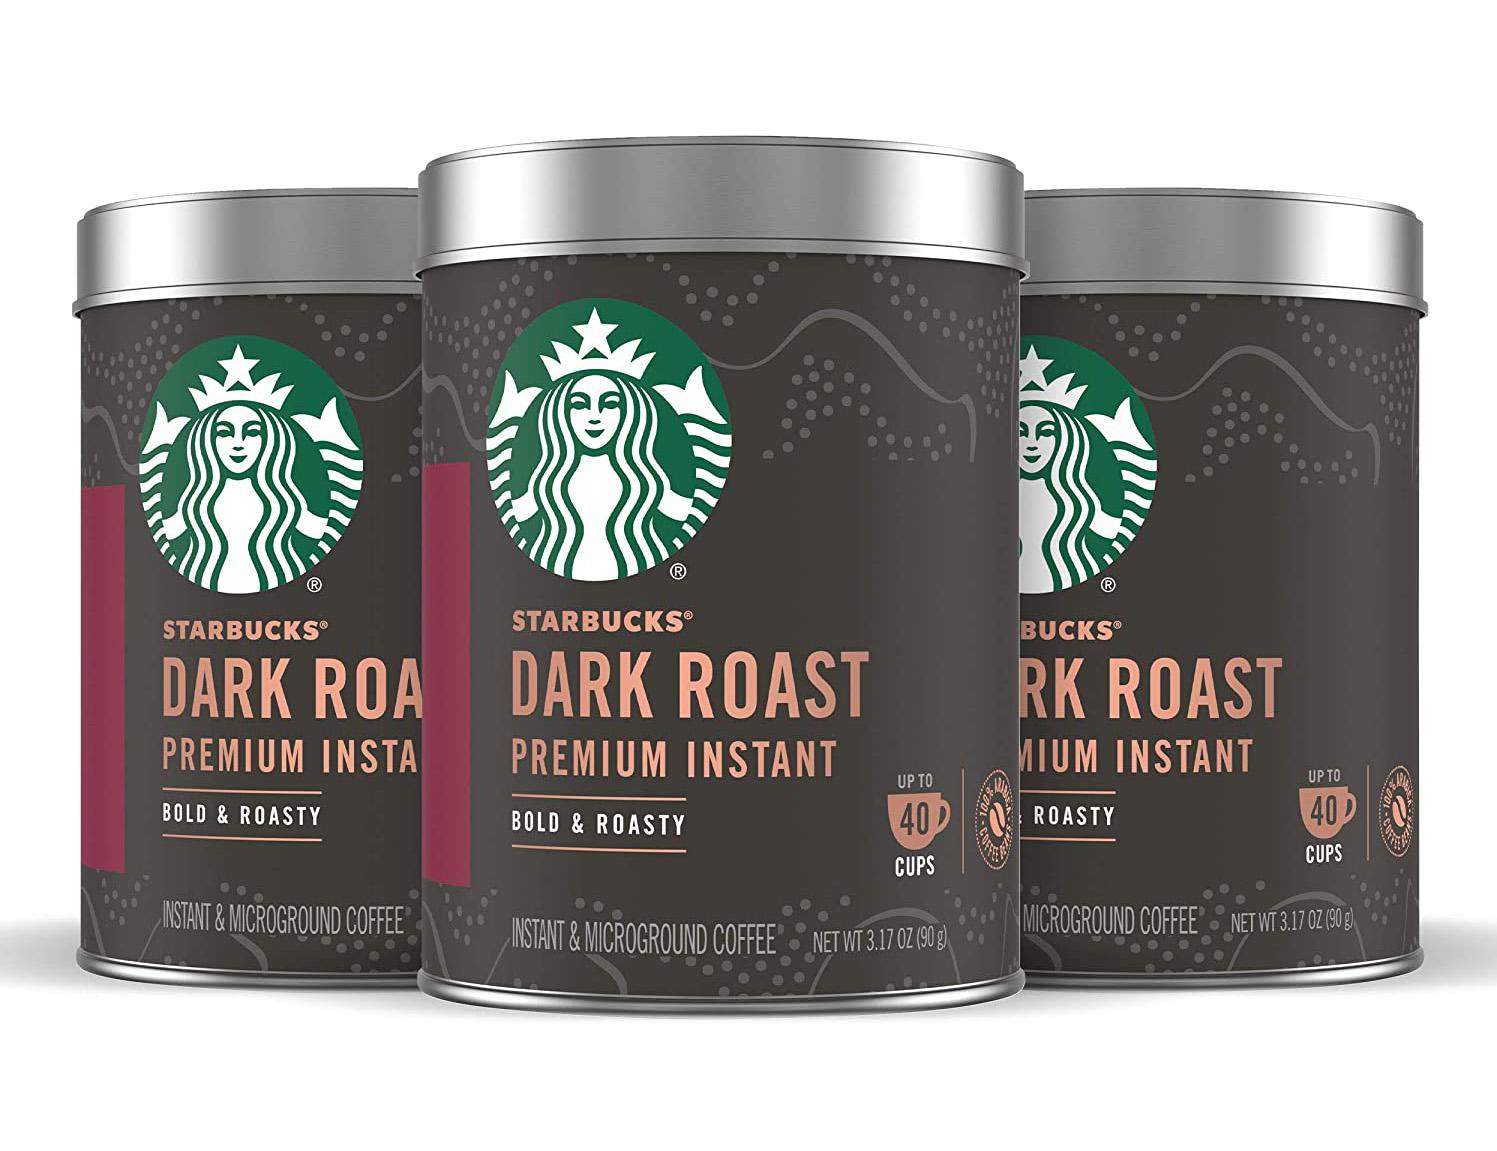 Starbucks Premium Instant Coffee 3 Pack for $20.95 Shipped